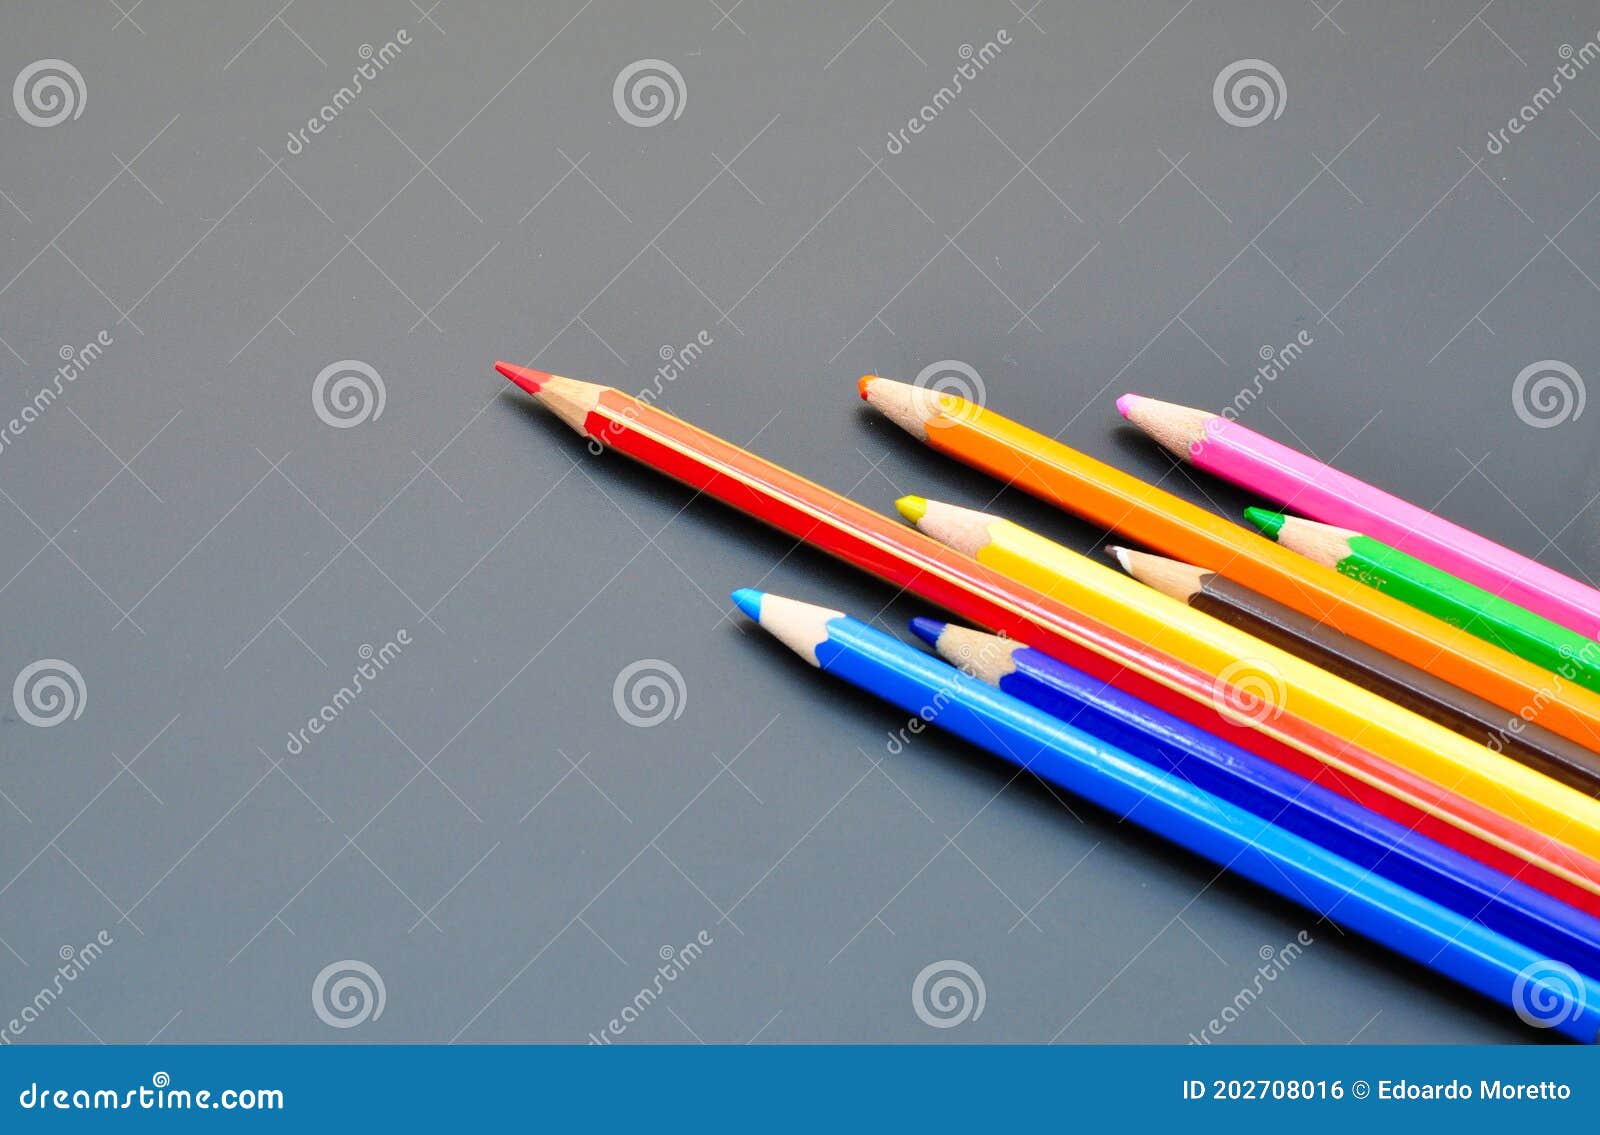 leadership makes differences shown by color pencils